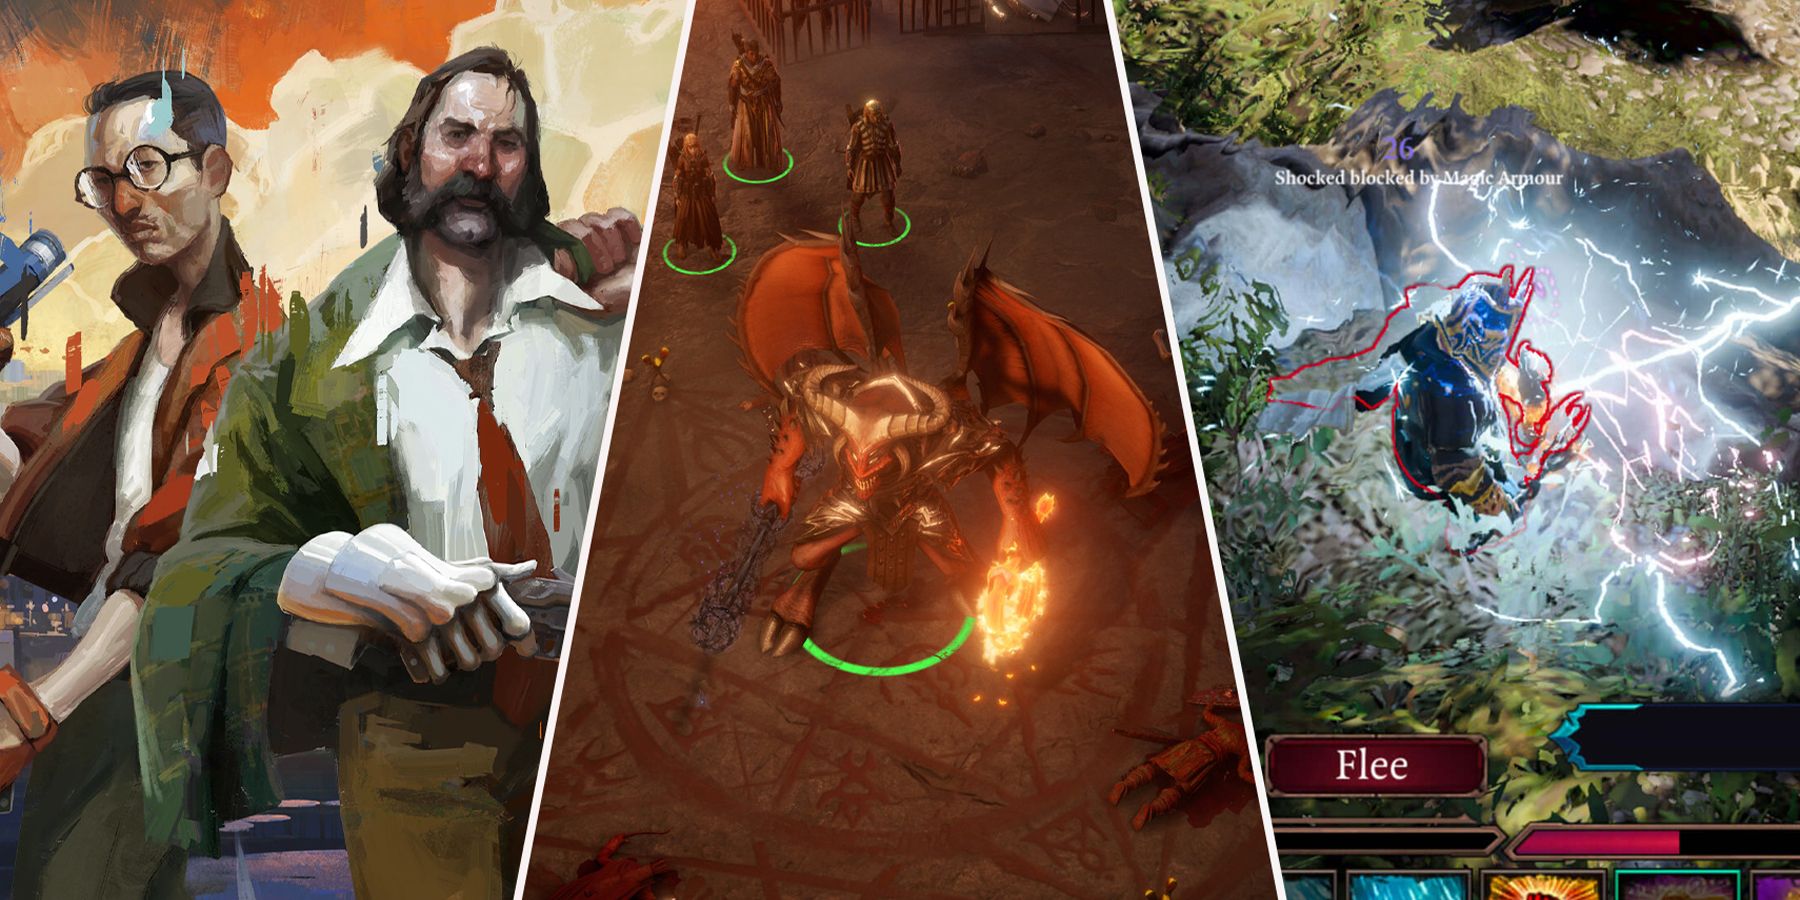 5 amazing fantasy role-playing games to replay in 2022